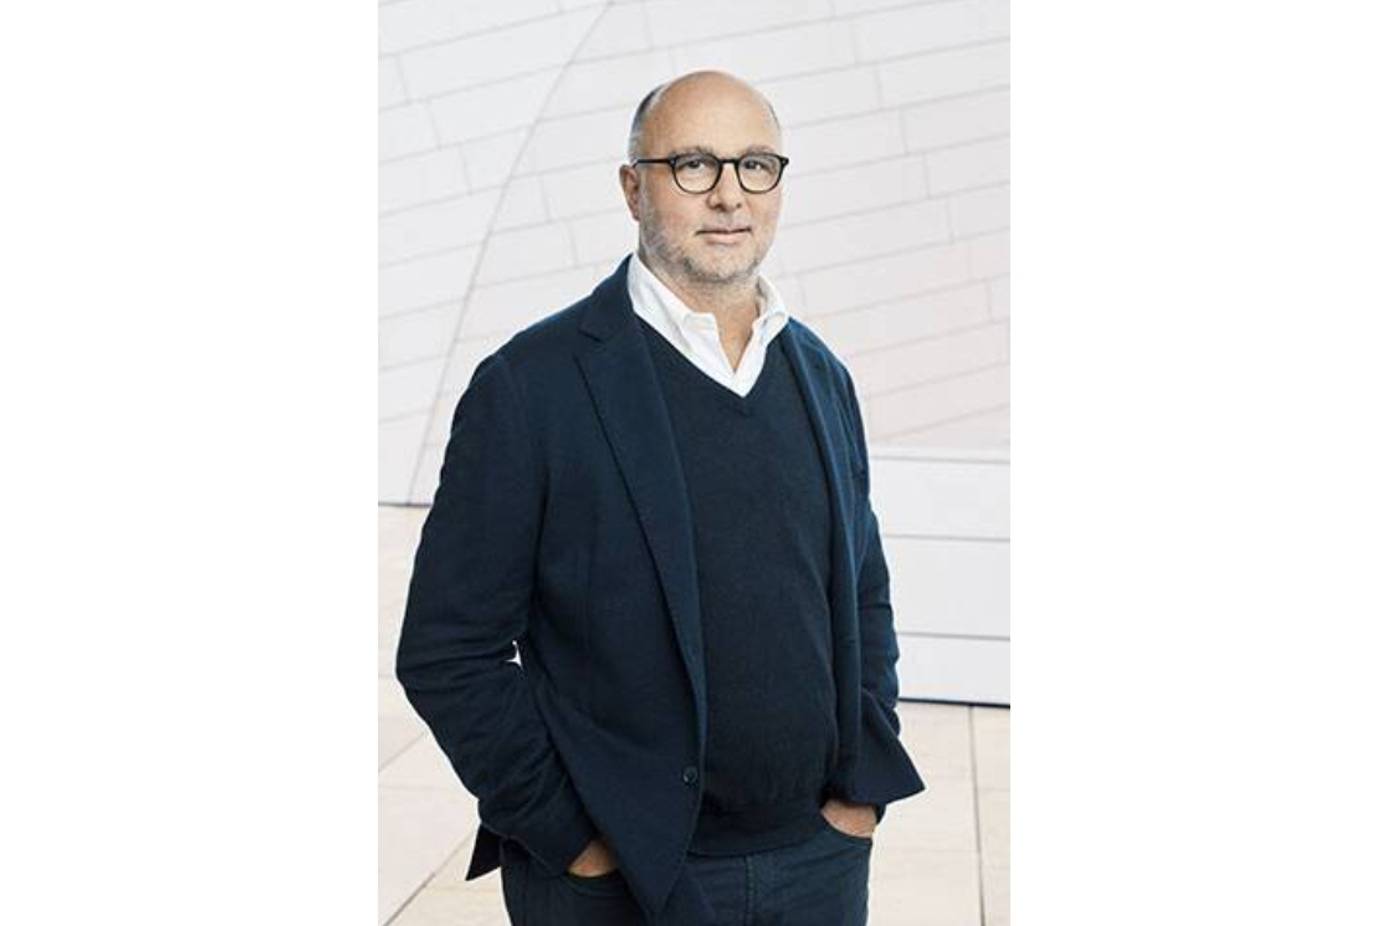 LVMH adds luxury brands Fendi and Loro Piana to Andrea Guerra's